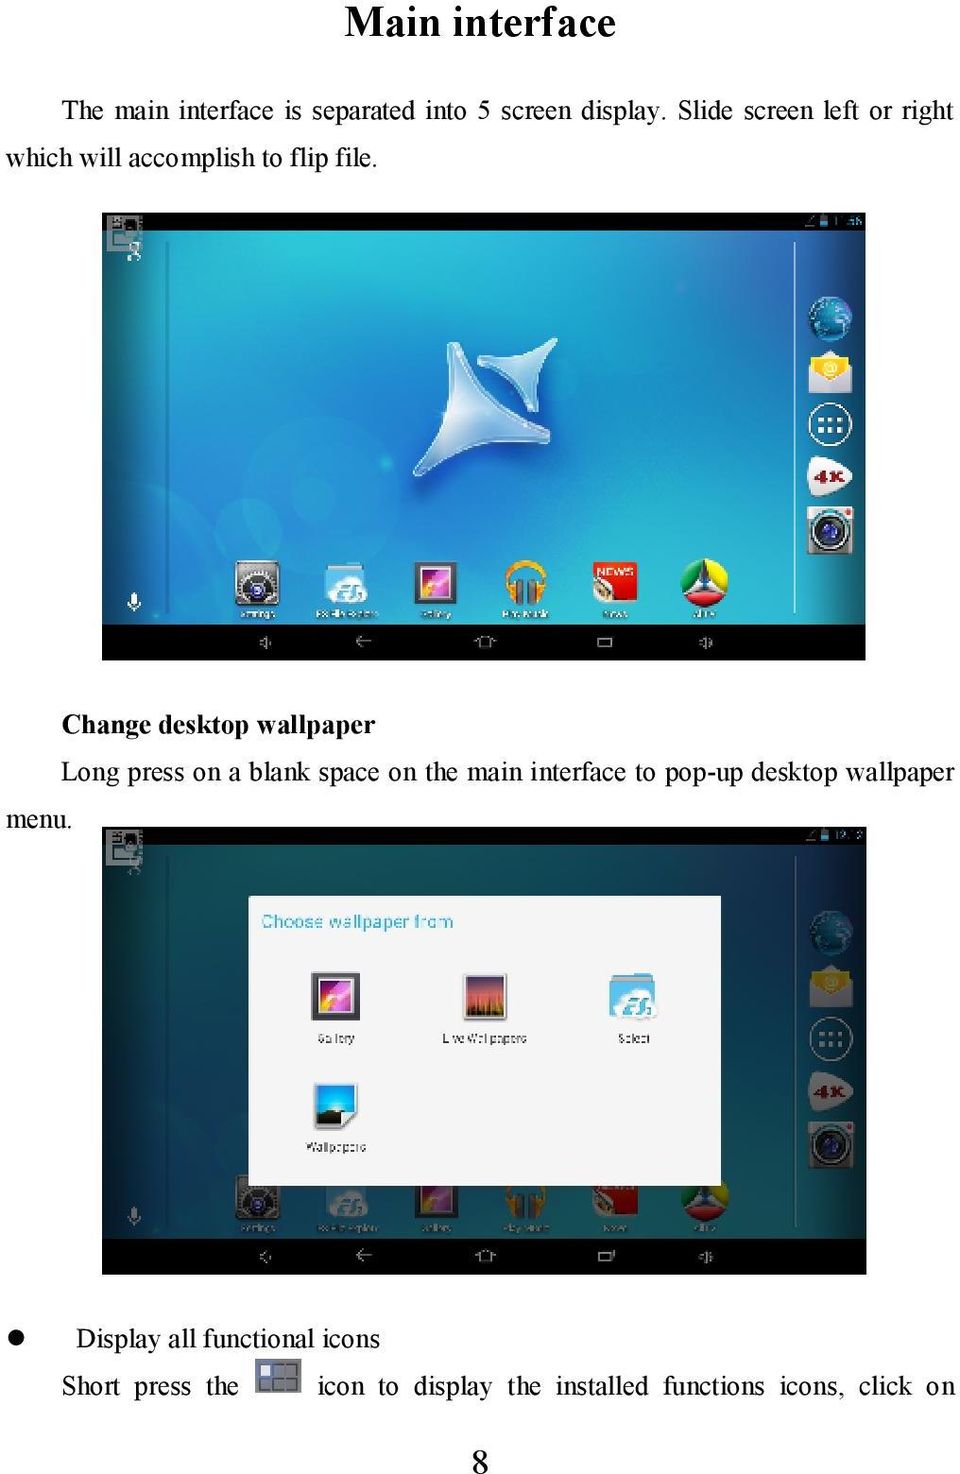 Change desktop wallpaper Long press on a blank space on the main interface to pop-up